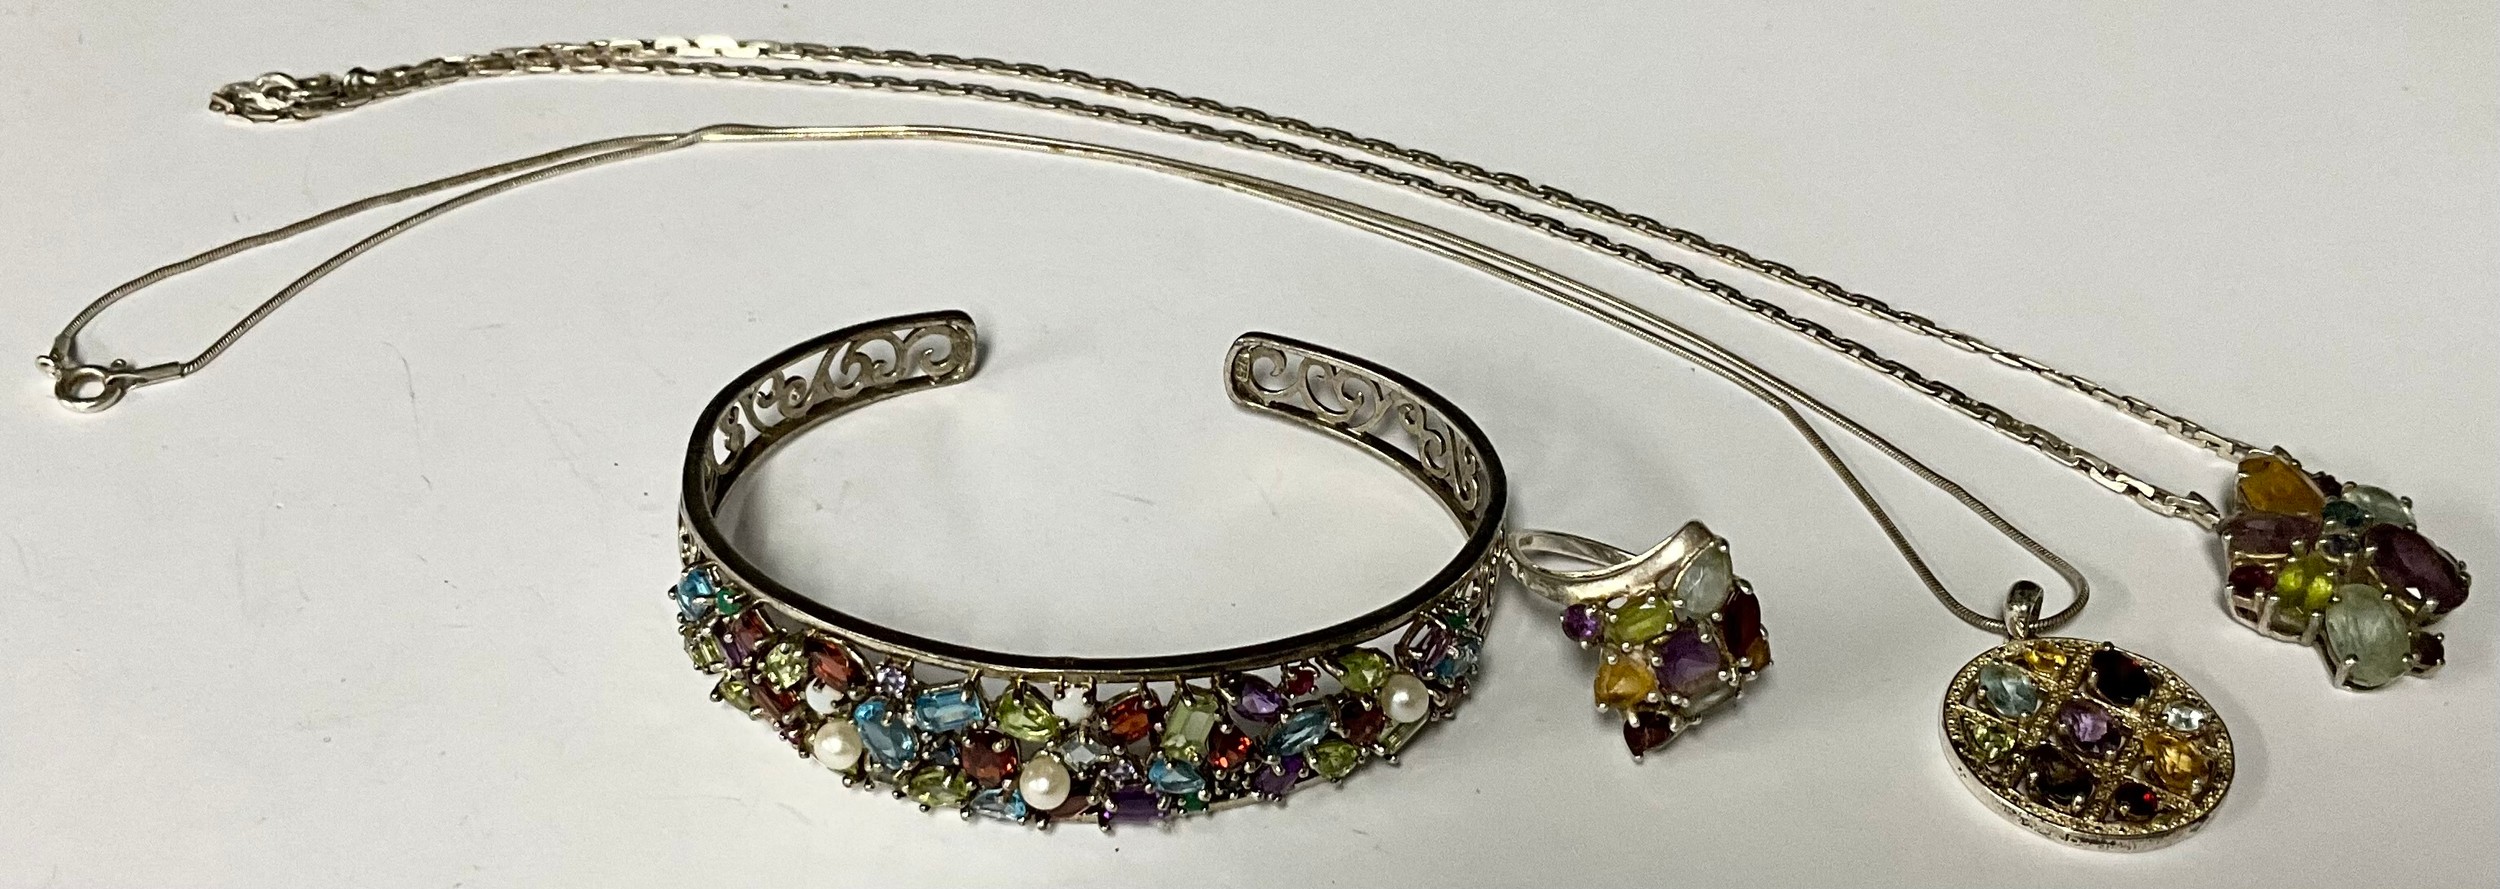 A sterling silver cuff bracelet, set with an assortment of colourful semi-precious stones, marked